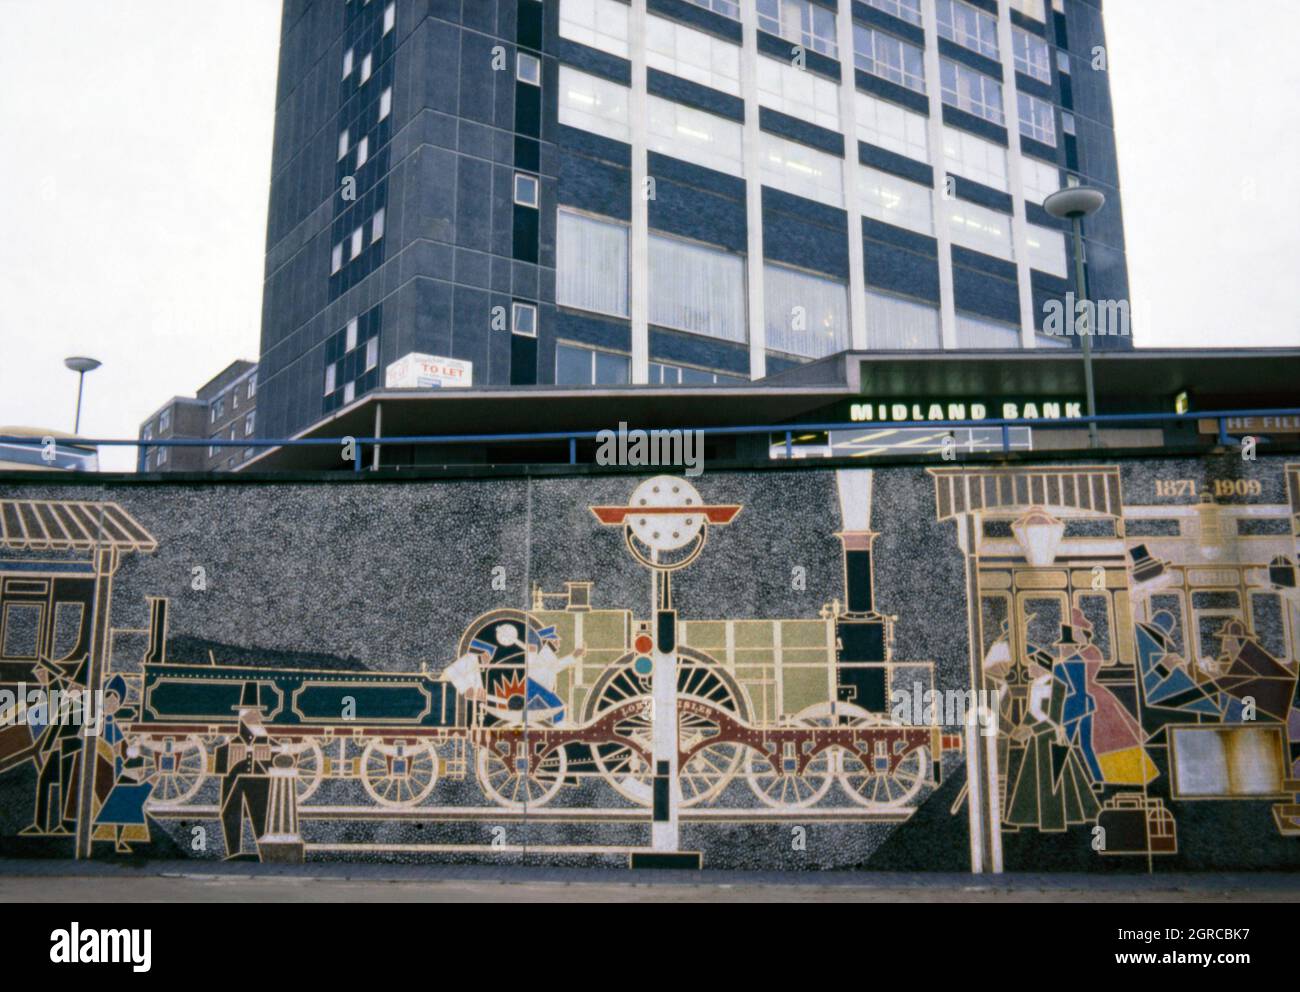 A view of the original ‘History of Snow Hill’, a 1968 mural by Kenneth Budd located at St Chad’s Queensway, Birmingham, England, UK in 1978. The mural celebrated the history of Birmingham Snow Hill station and the Great Western Railway, the company that ran the train service between London Paddington and Snow Hill station. The mural was destroyed in 2007 when the area was redeveloped. In 2013, Kenneth Budd's son Oliver Budd remade the mural in miniature nearby. This image is from an old amateur 35mm colour transparency – a vintage 1970s photograph. Stock Photo